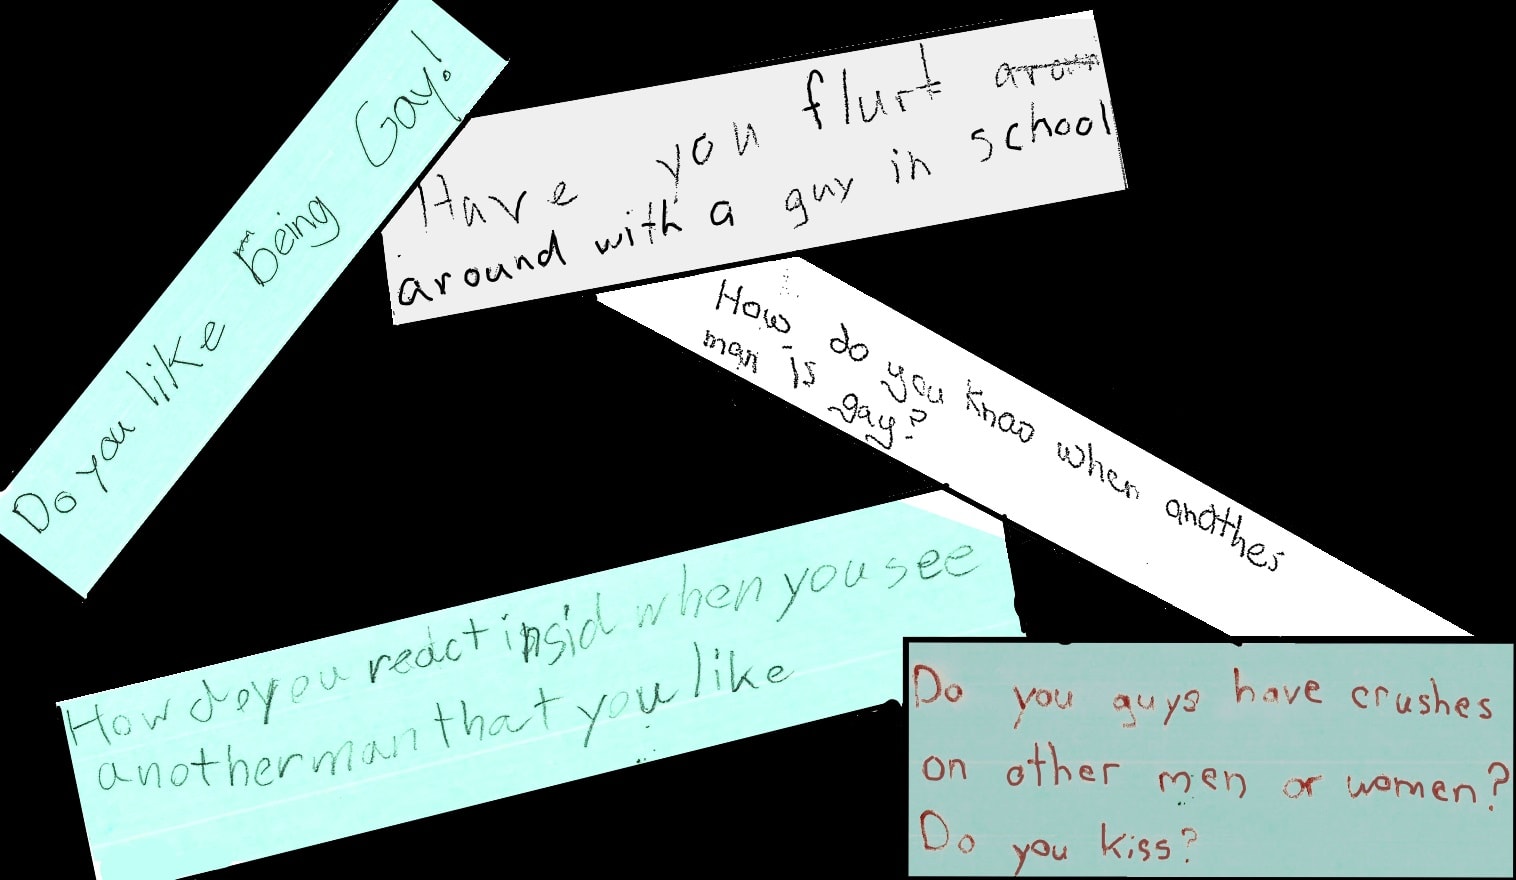 Five slips of paper in blue and white on a black background, with childlike handwritten text on each, including: “Do you guys have crushes on other men or women? Do you kiss?”; “How do you know when another man is gay?”; Have you flurt [sic] around with a guy in school”; “How do you react when you see another man that you like”; and “Do you like being gay!”